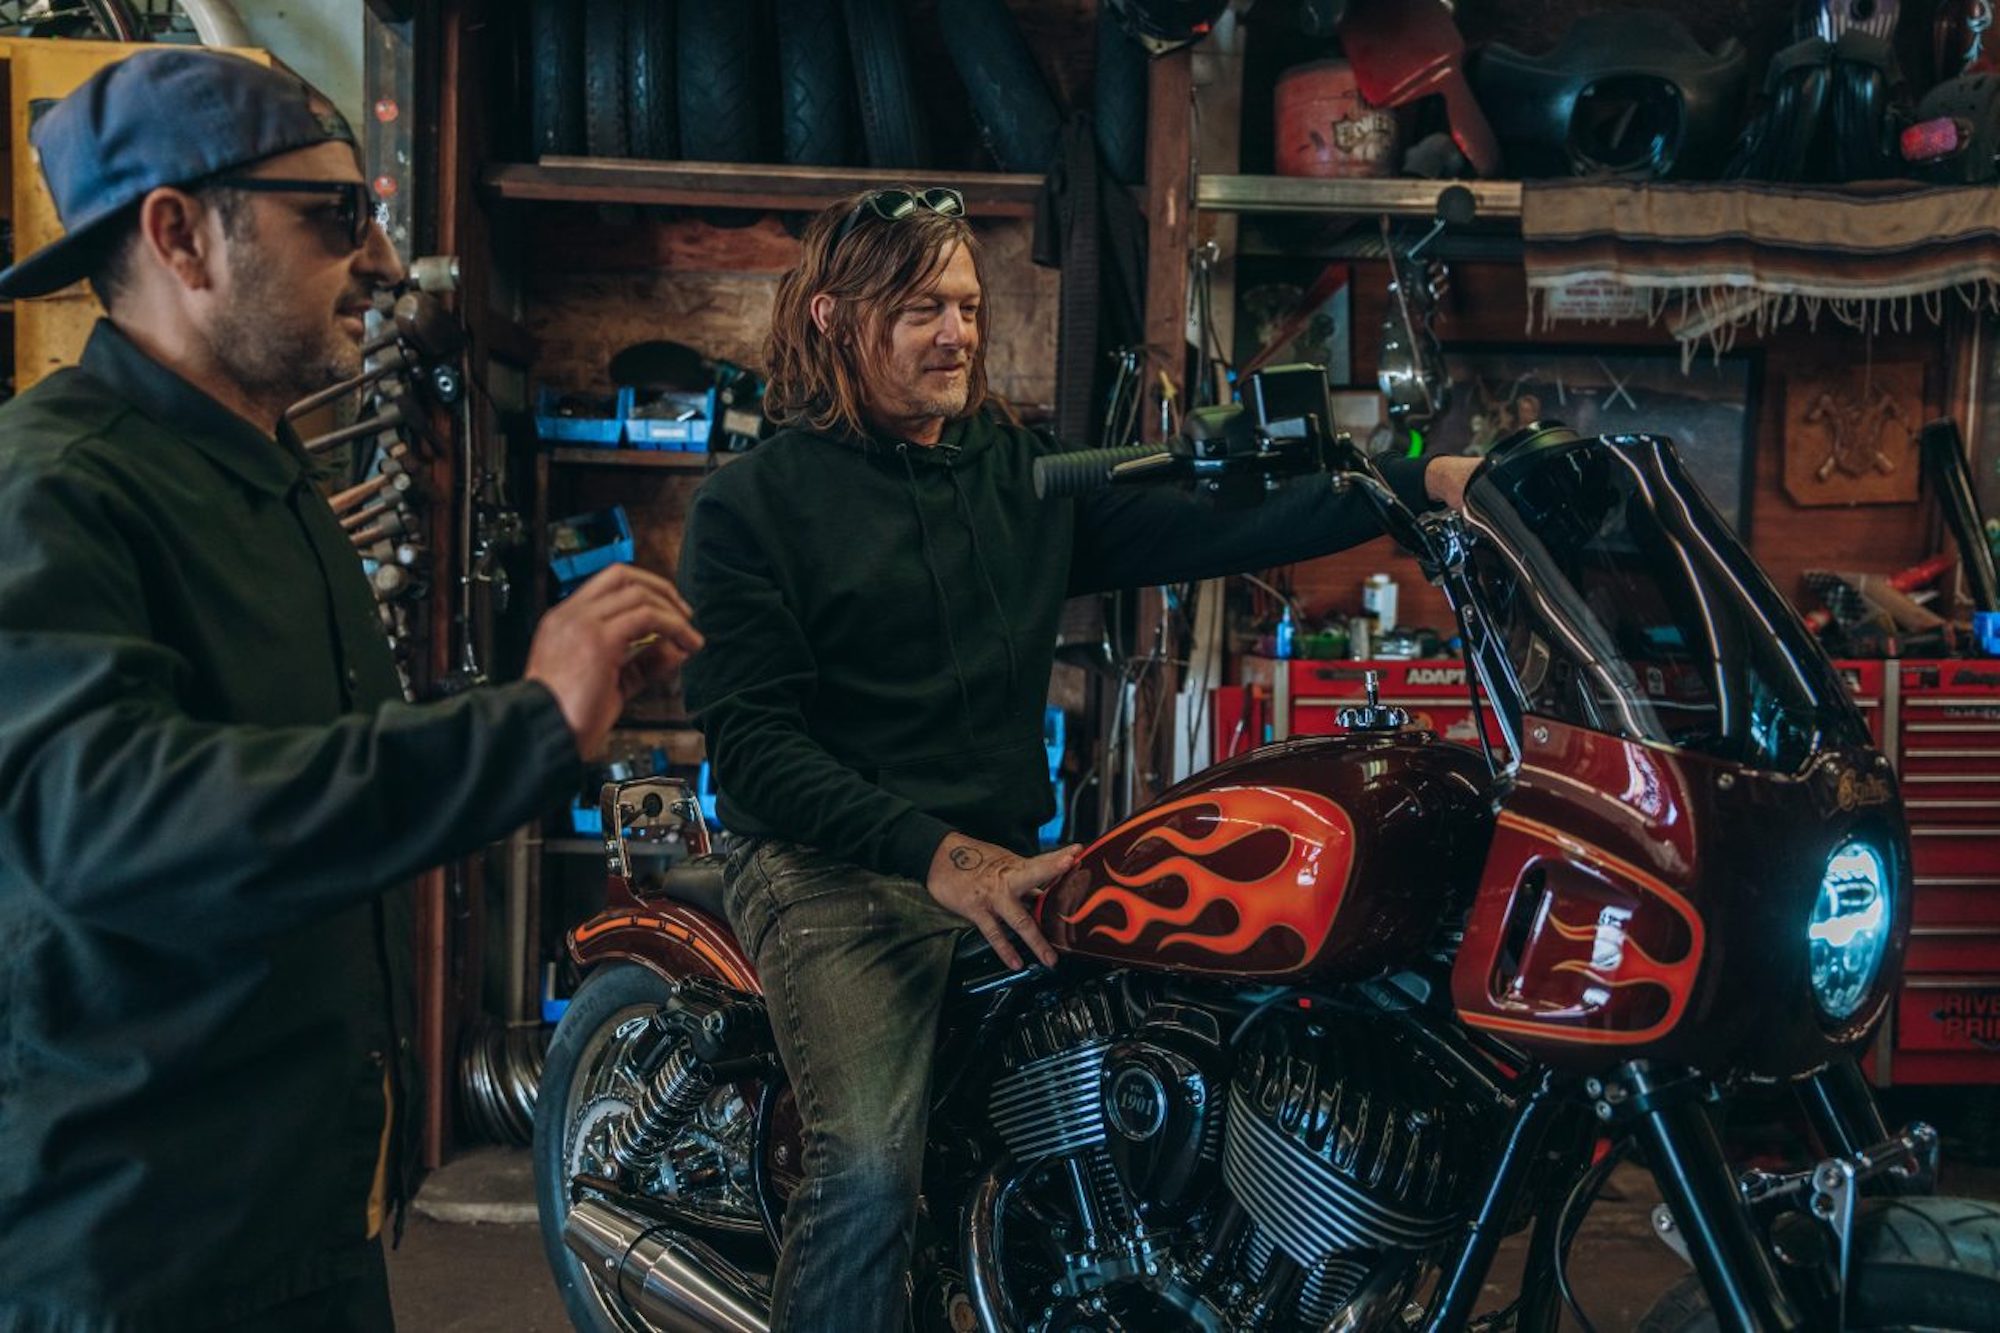 “Walking Dead” actor Norman Reedus' new custom Sport Chief from Indian's Forged series. Media sourced from Indian.